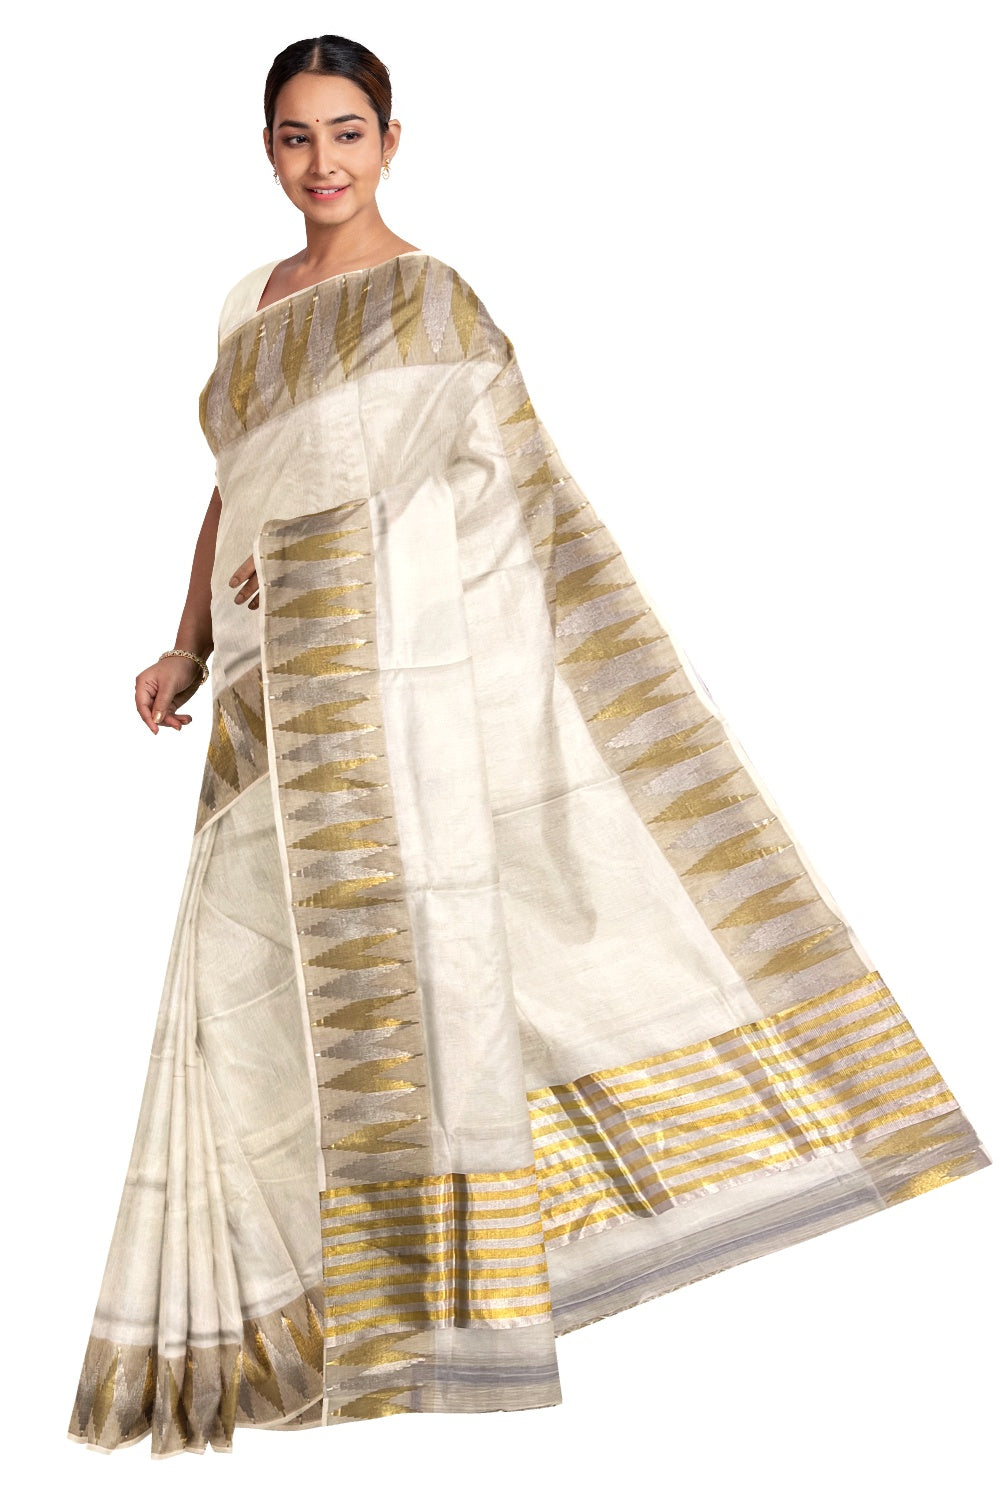 Southloom™ Premium Handloom Kerala Saree with Golden and Silver Woven Temple Border